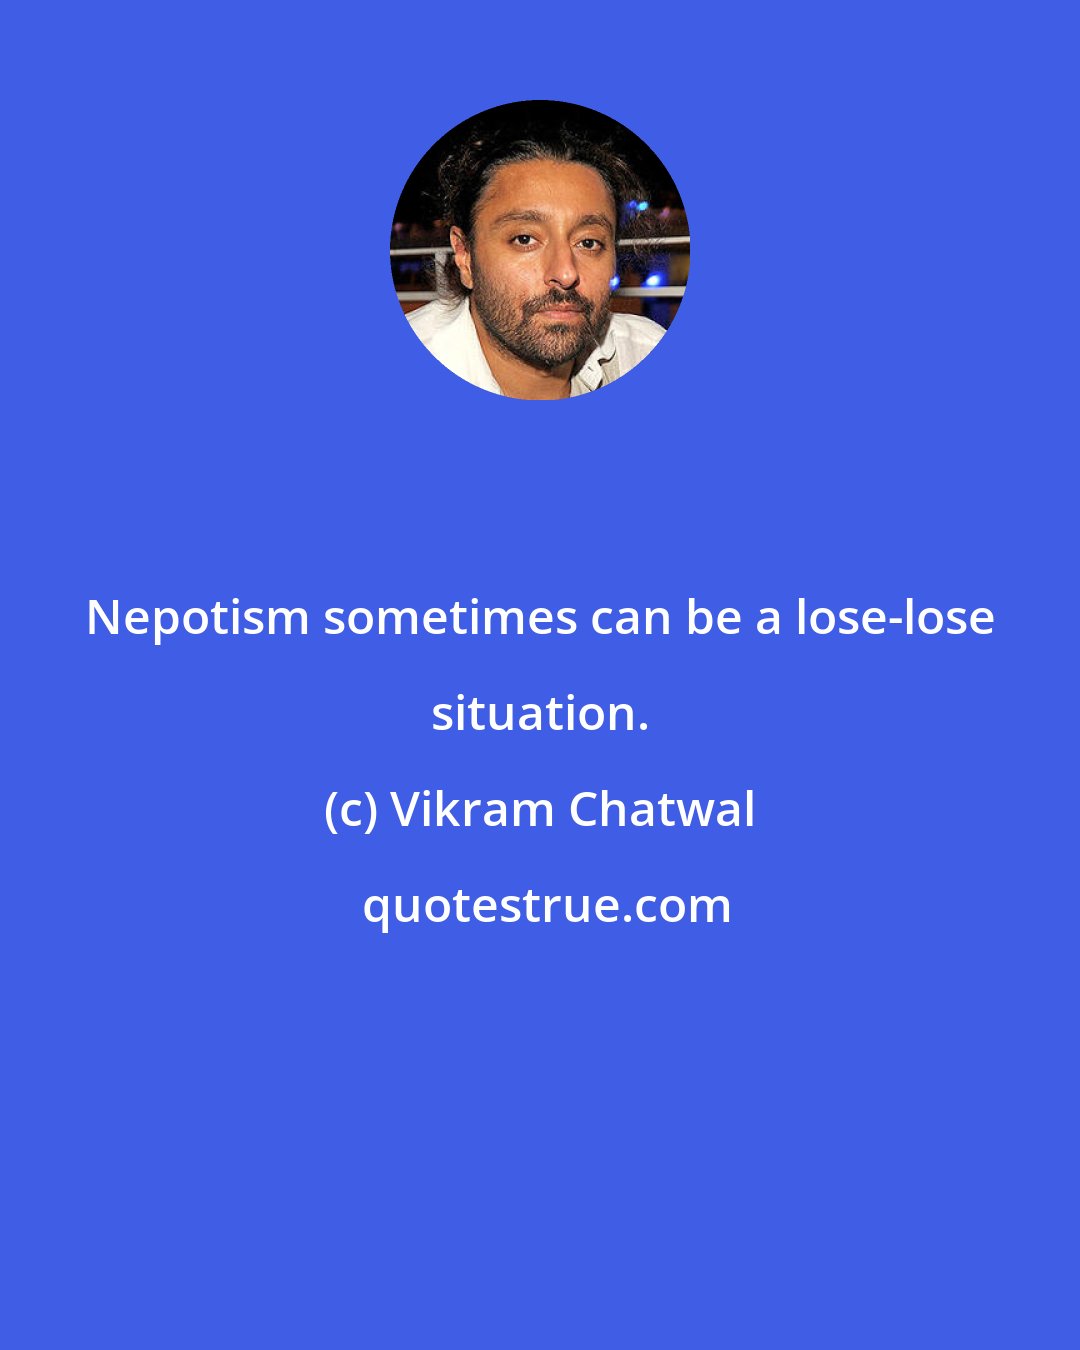 Vikram Chatwal: Nepotism sometimes can be a lose-lose situation.